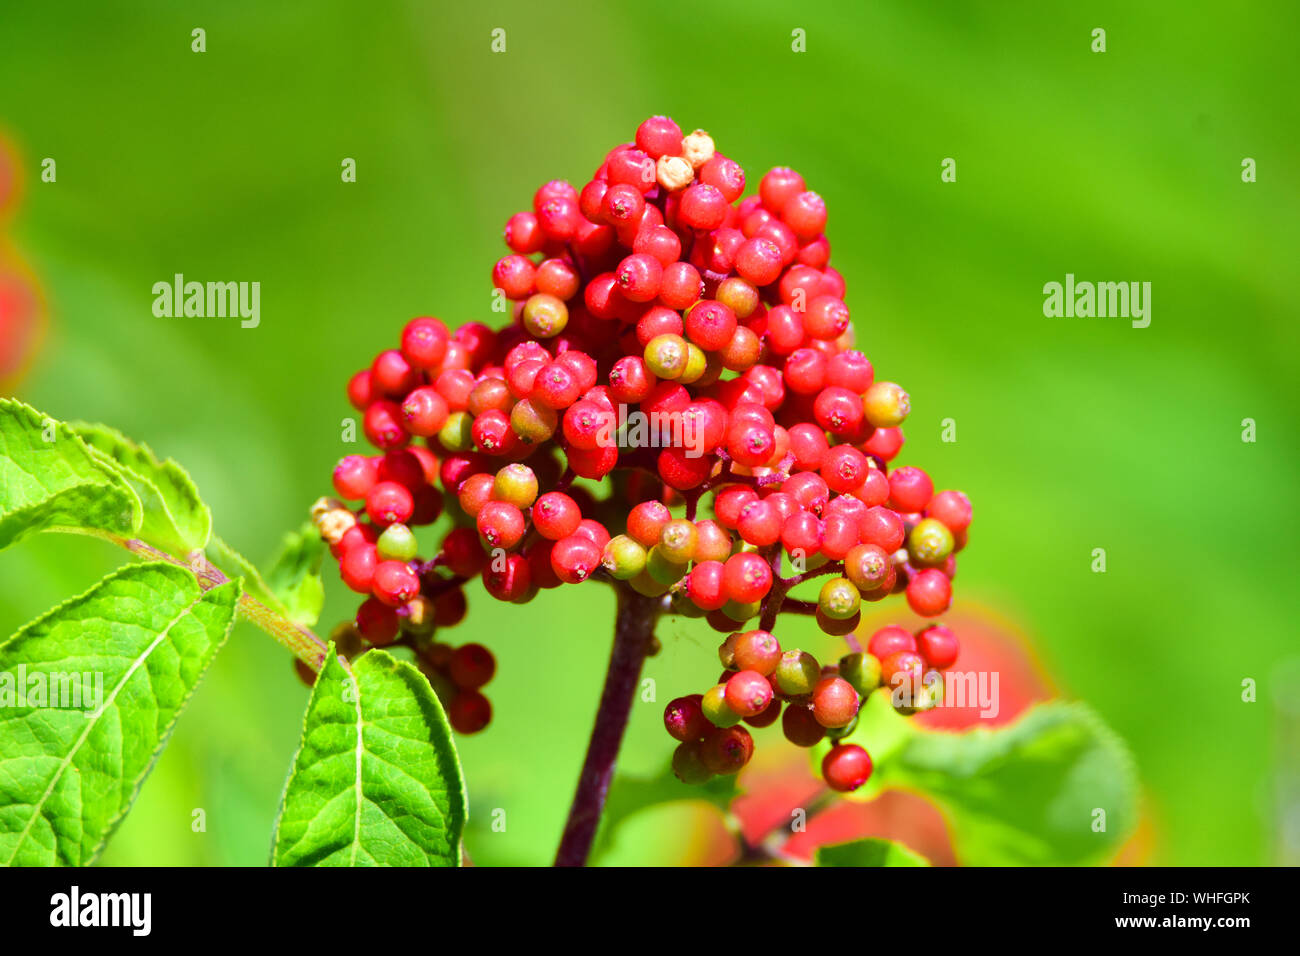 Red berries in national park in Canada. Stock Photo